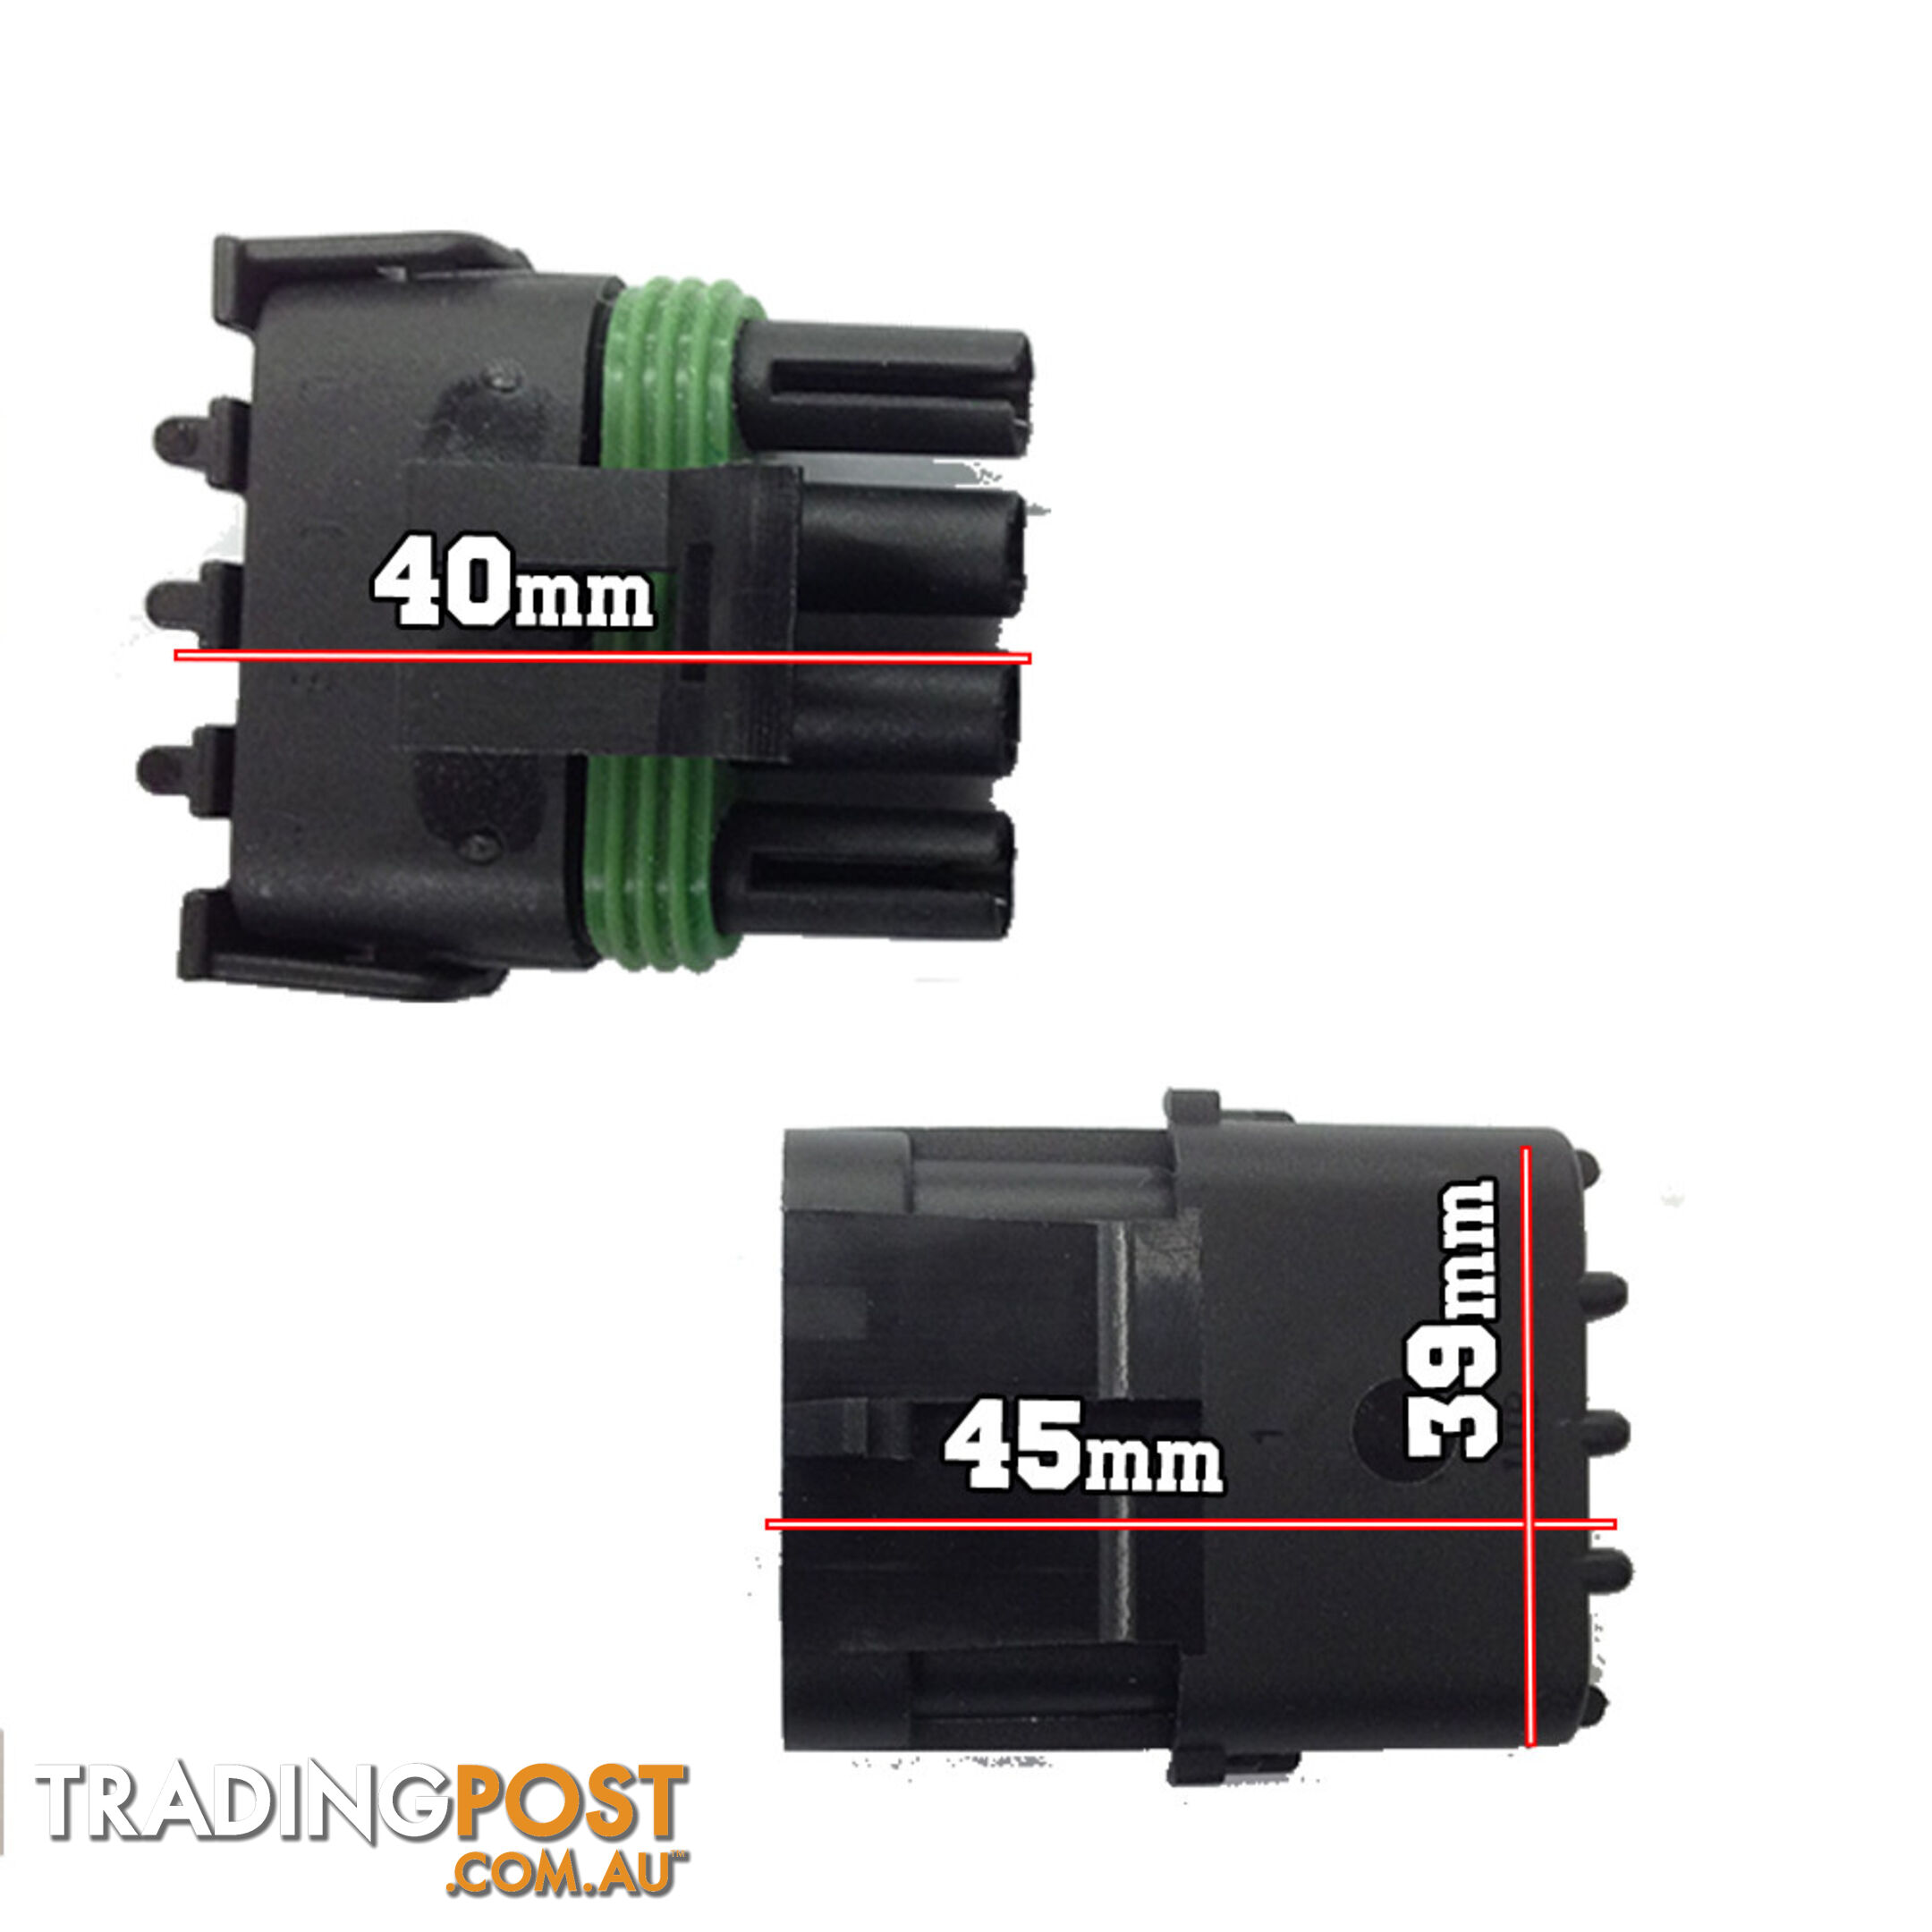 2PCS 12V/24V KITS 1.5MM 4 WAY WATERPROOF AUTO ELECTRICAL WIRE CONNECTOR PLUG